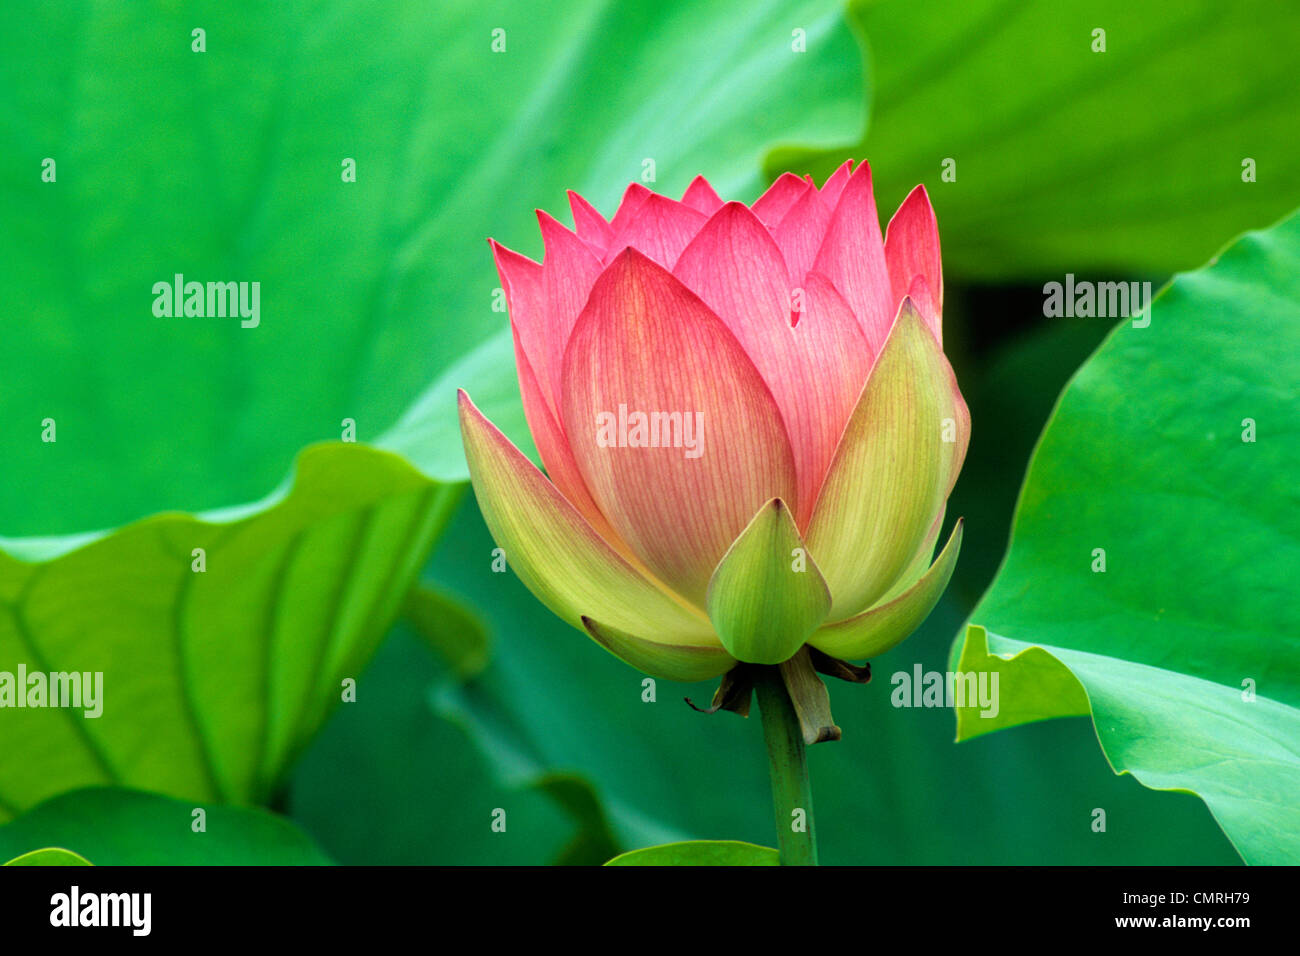 1990s CLOSE-UP PINK LOTUS FLOWER AMONG GREEN LEAVES Stock Photo